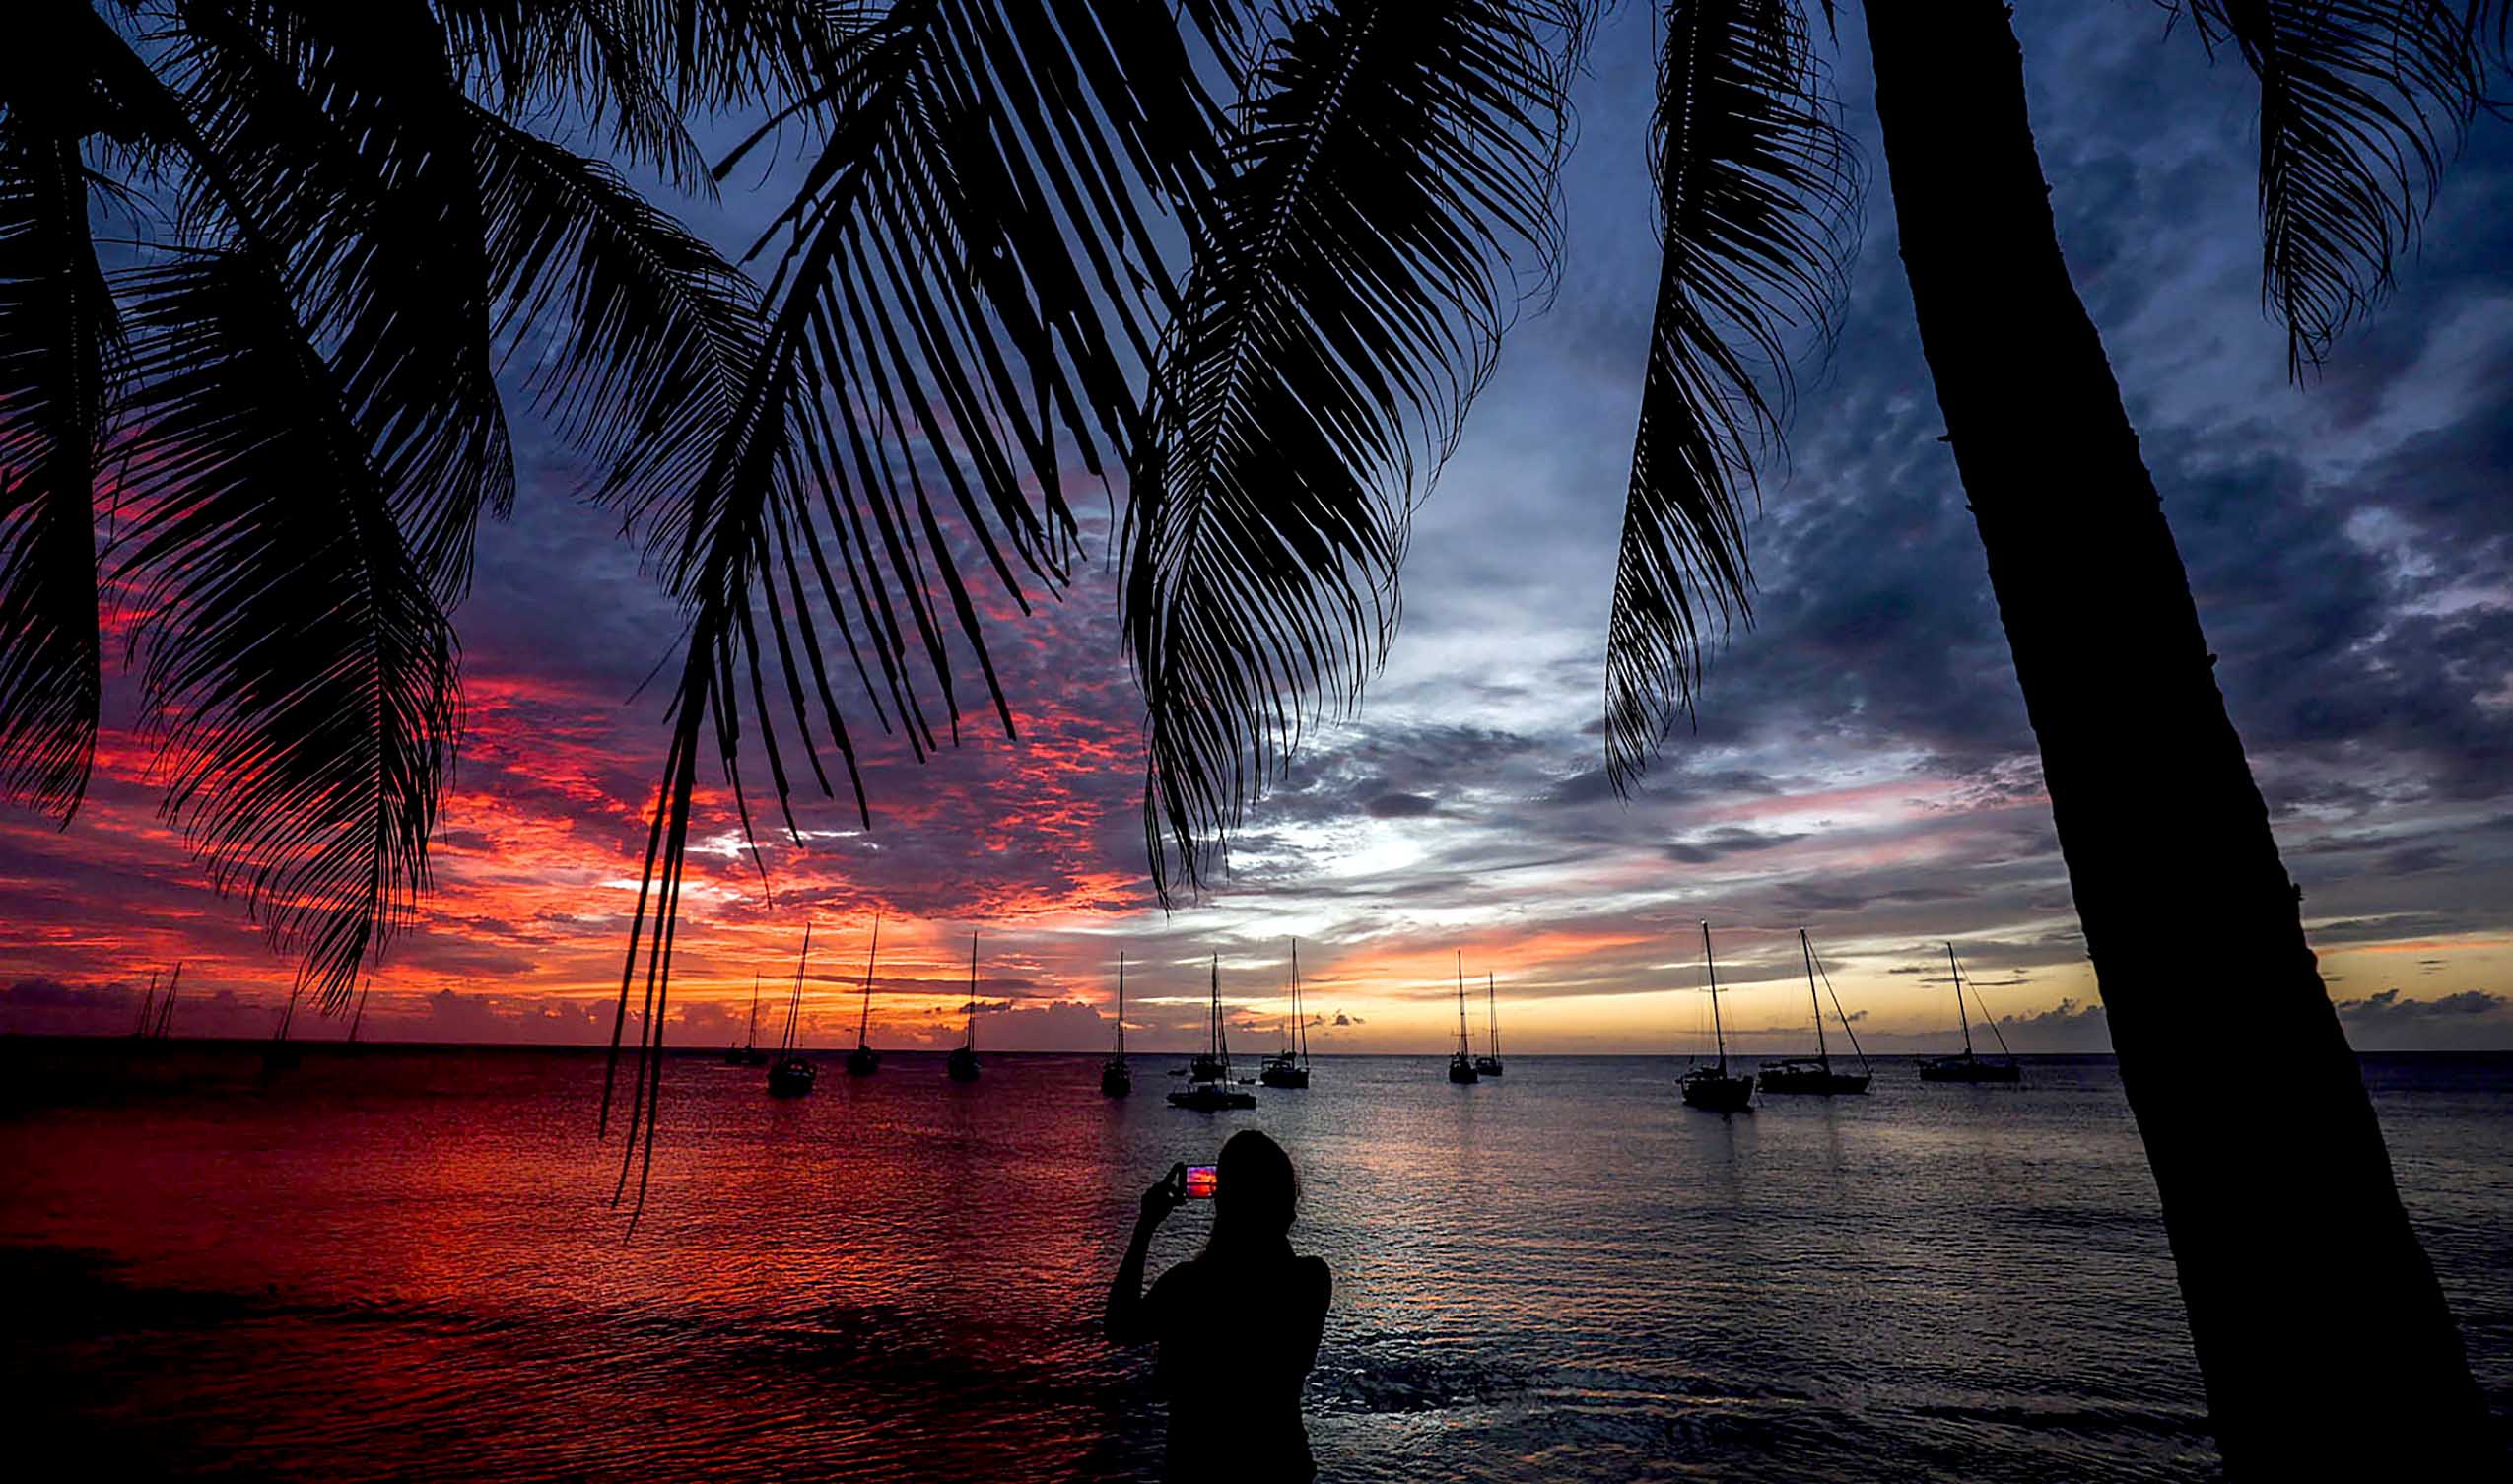 A woman takes photographs of the ocean during the sunset in Le Carbet, on the French Caribbean island of Martinique on November 24, 2022. (Photo by Charly TRIBALLEAU / AFP)